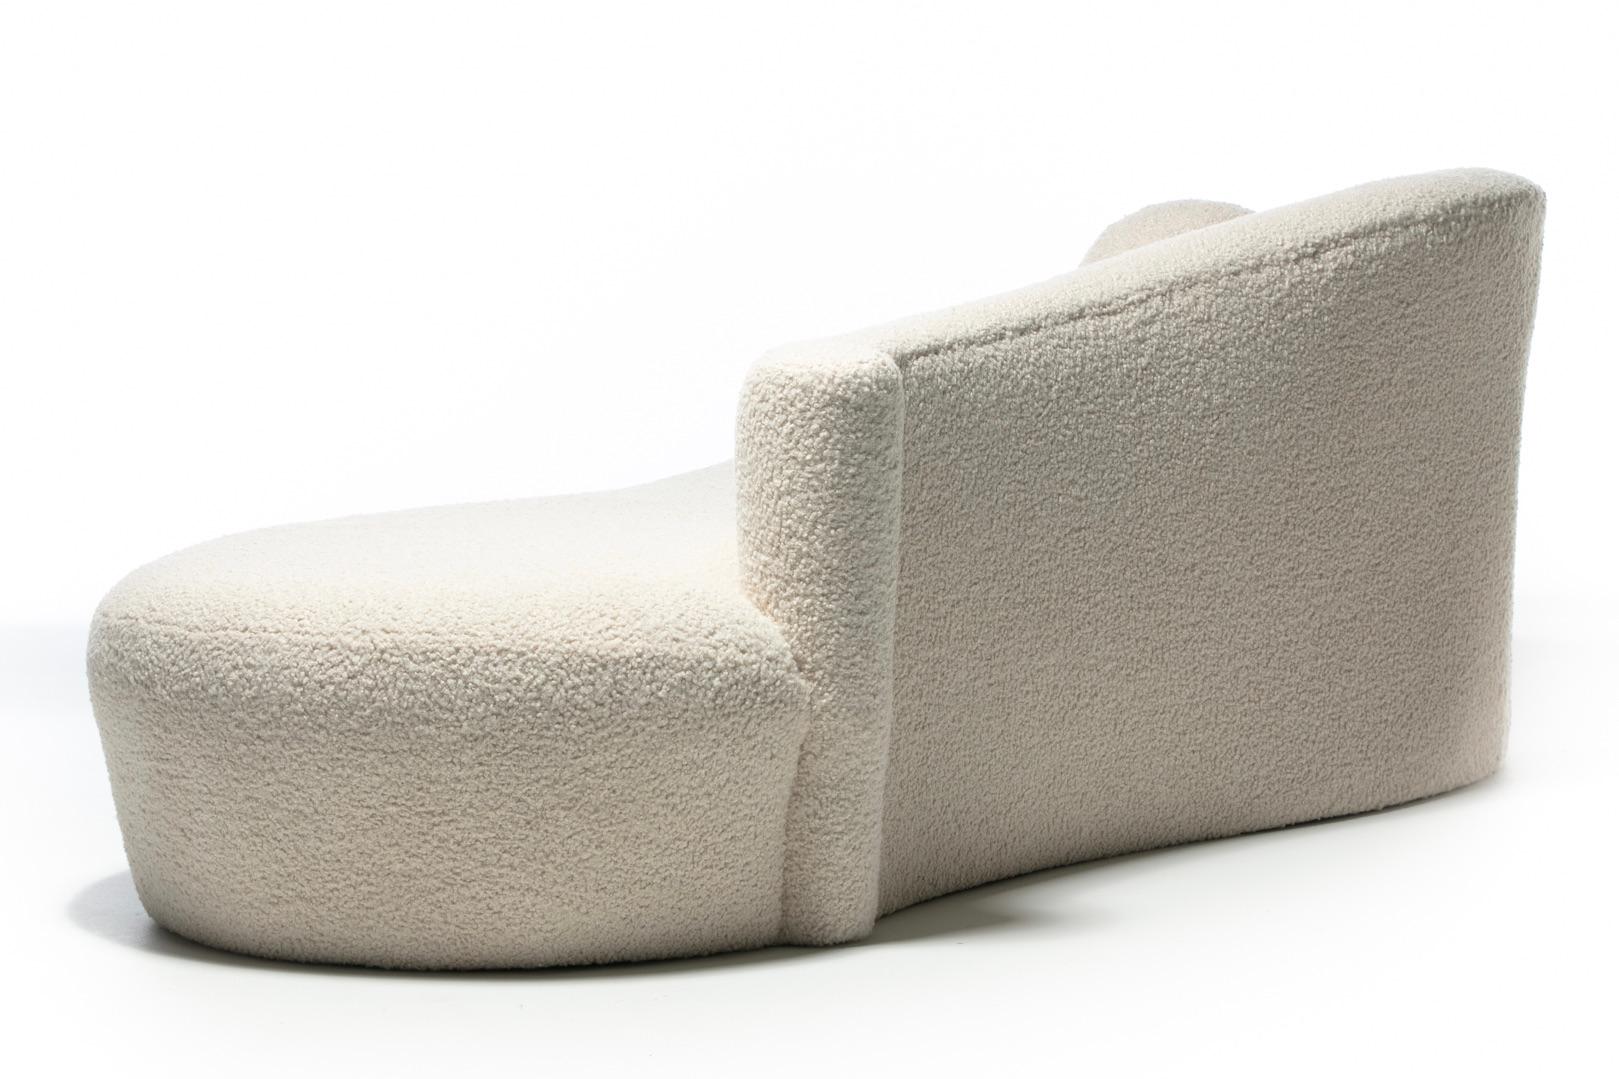 Weiman Post Modern Sofa Chaise Lounge in Supple Lux Ivory White Bouclé, c. 1990 In Good Condition For Sale In Saint Louis, MO